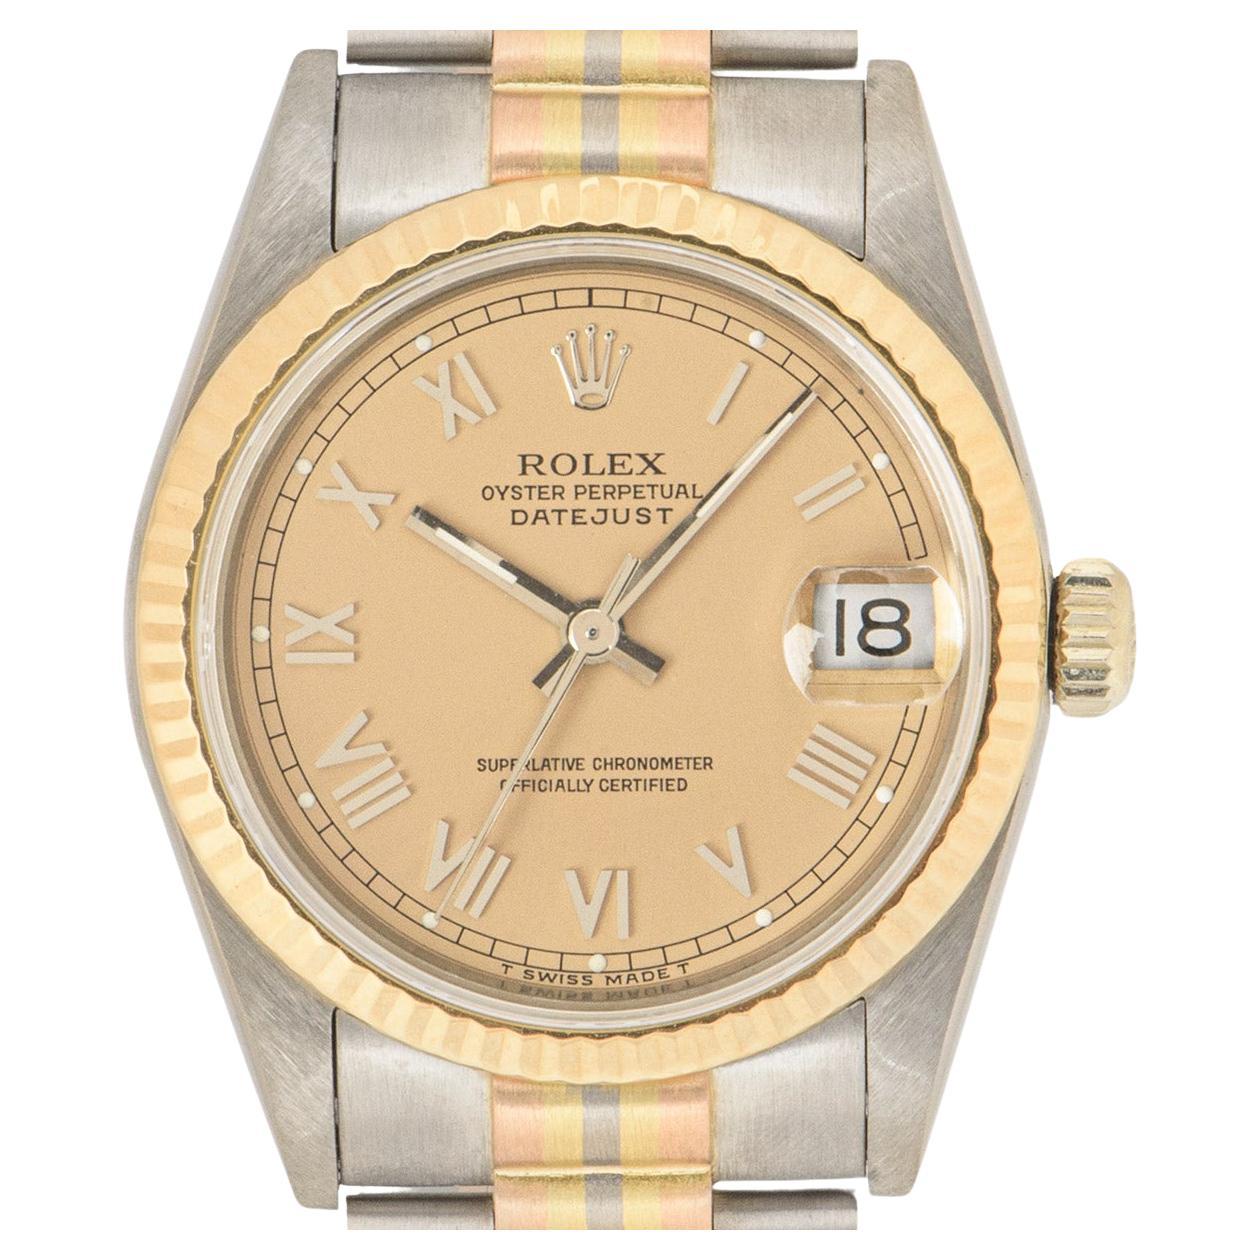 A captivating Datejust crafted in tri-gold by Rolex. Featuring a distinctive rose colored dial with applied roman numerals and a fixed yellow gold fluted bezel. Fitted with a sapphire glass, a self-winding automatic movement and an 18k tri-gold